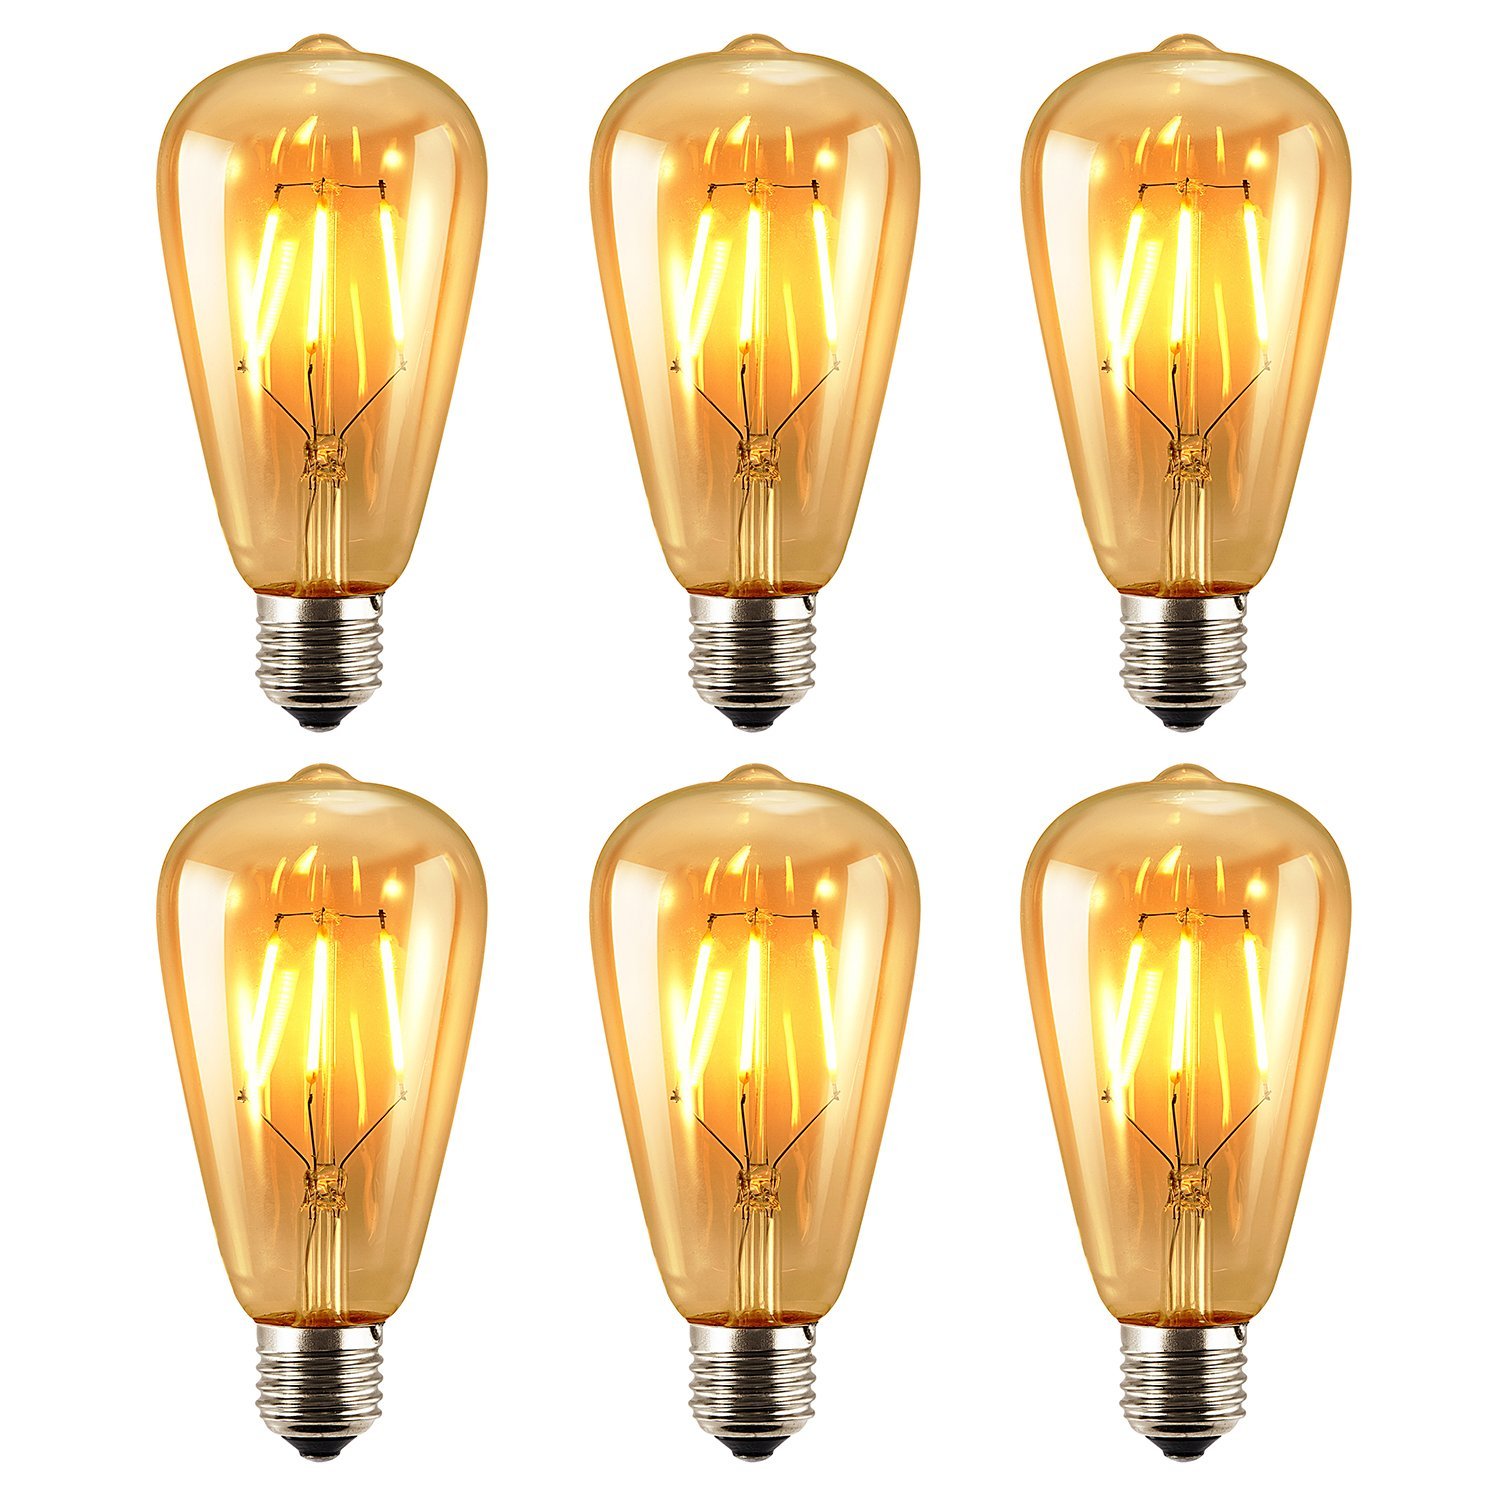 Vintage Edison Dimmable LED Warm White Light Bulbs – Pack of 6 – Just $20.99!